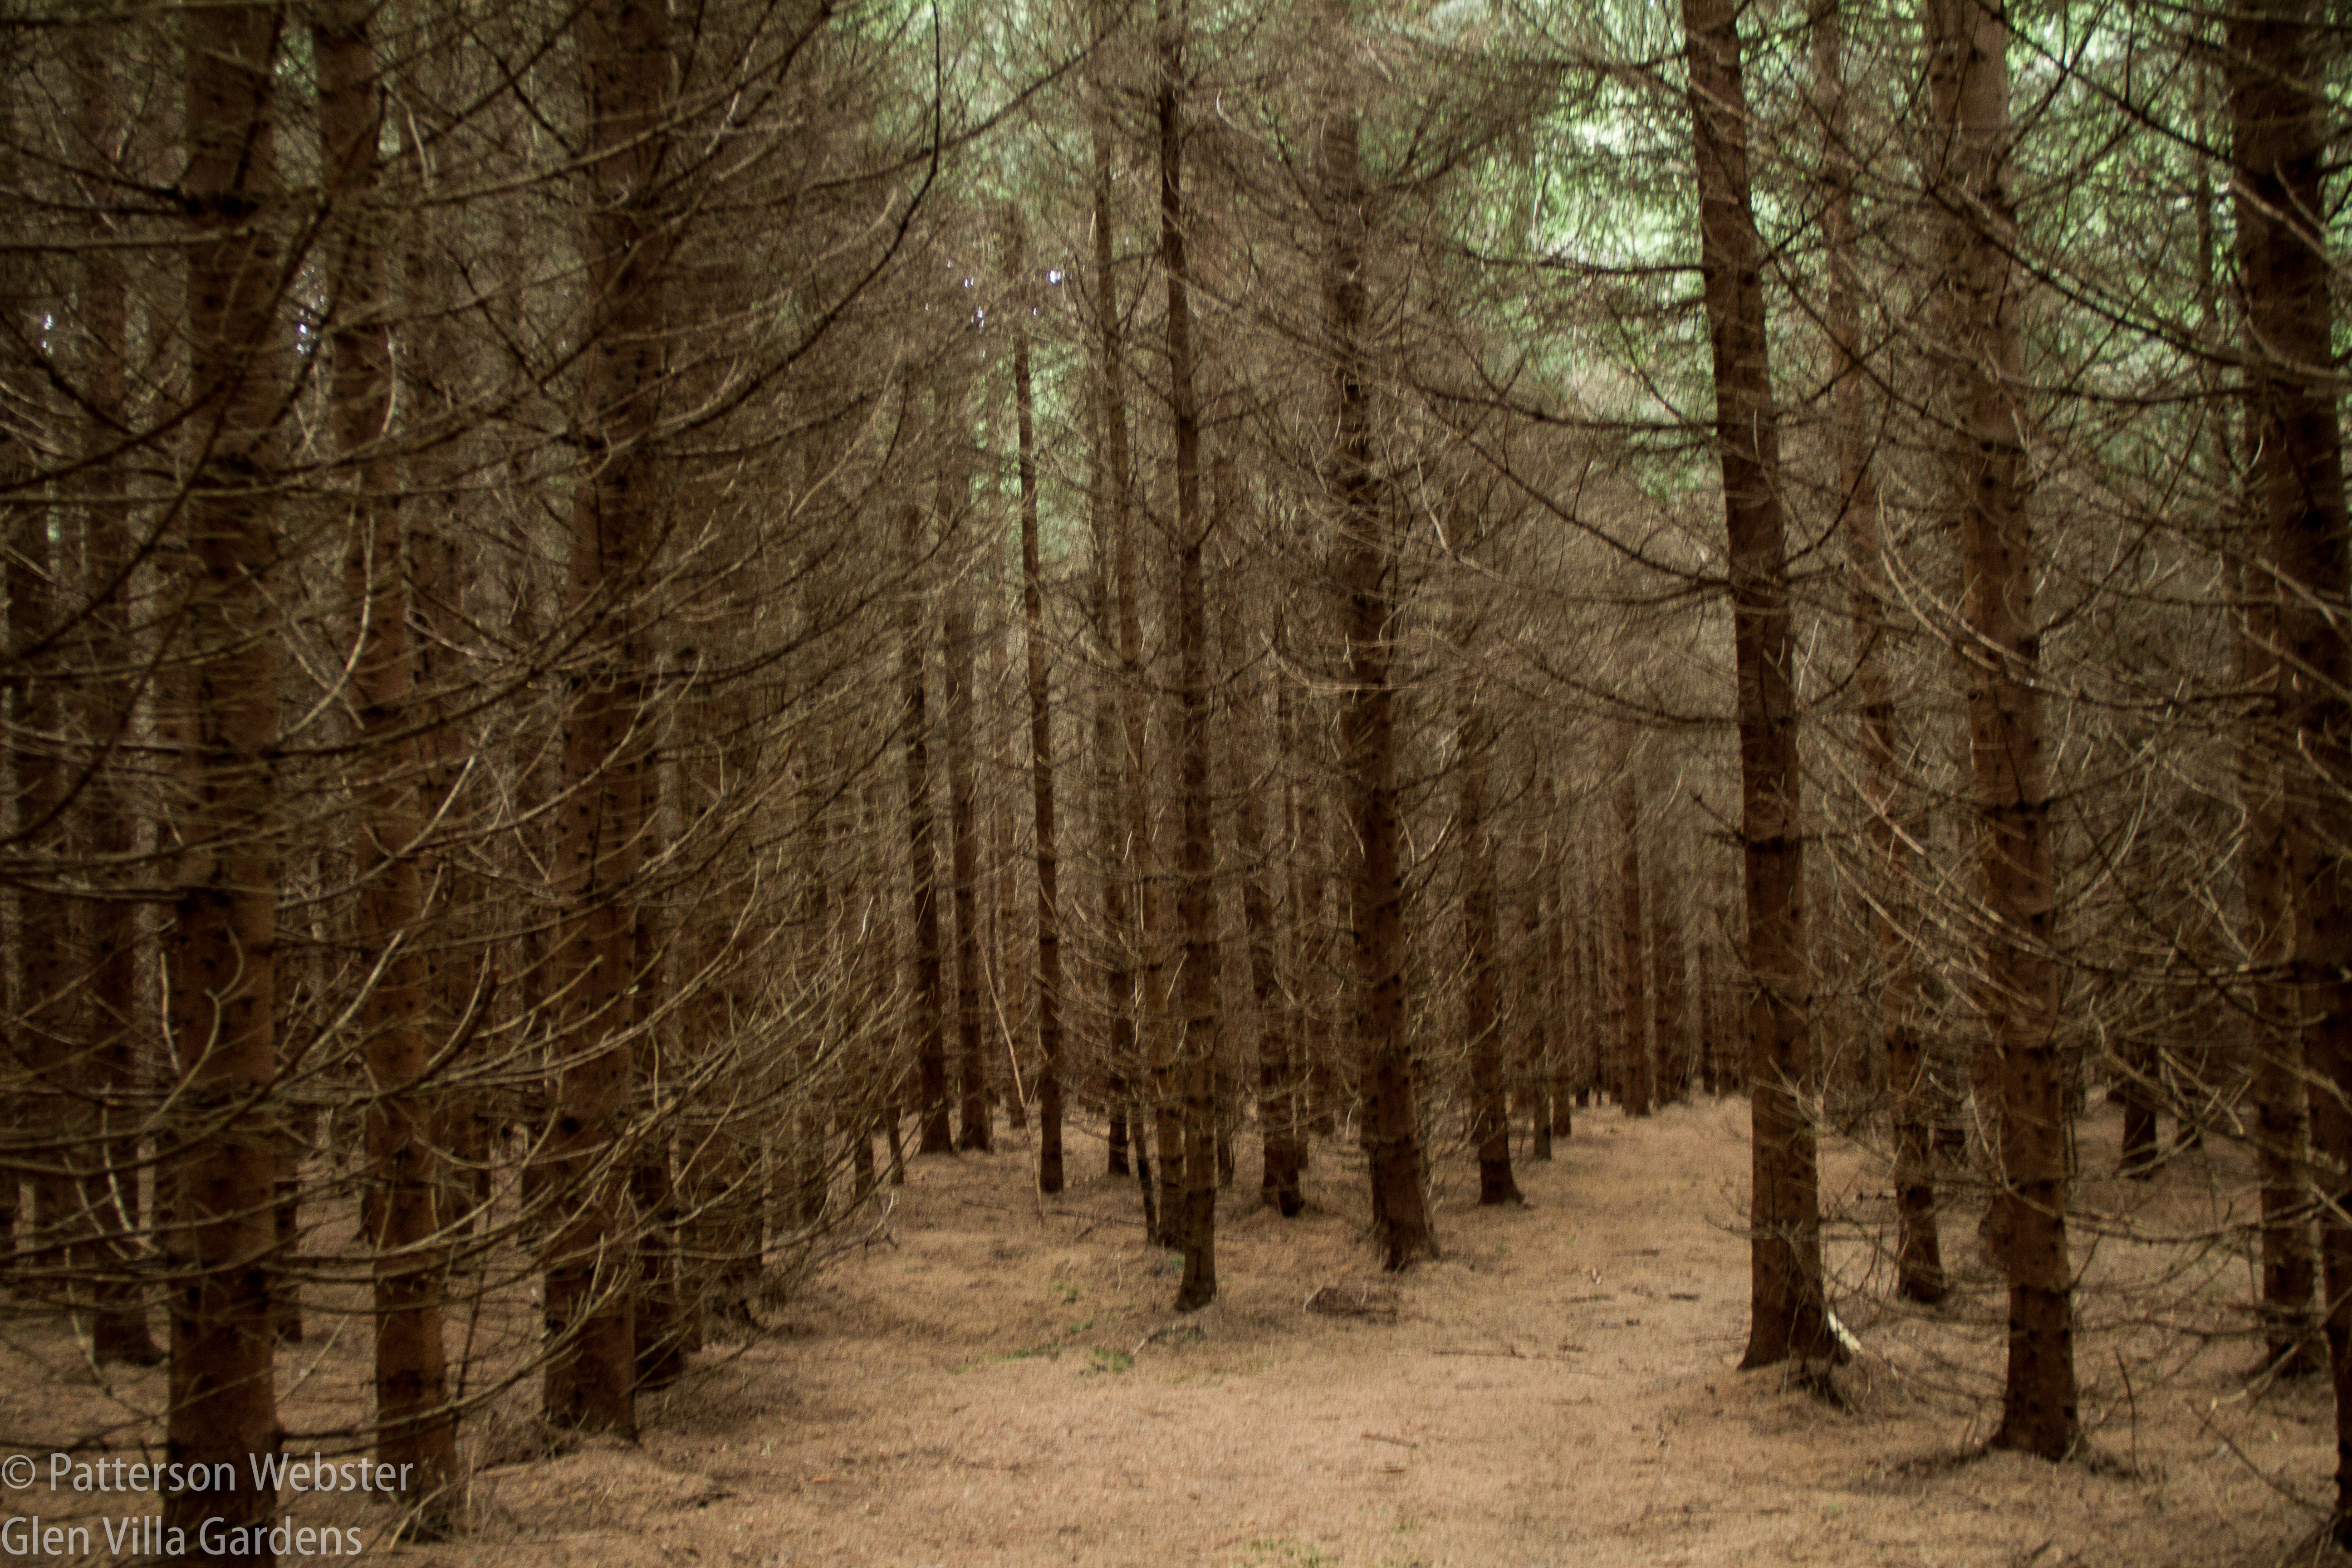 This forest of tall pines looks ghostly when photographed. 